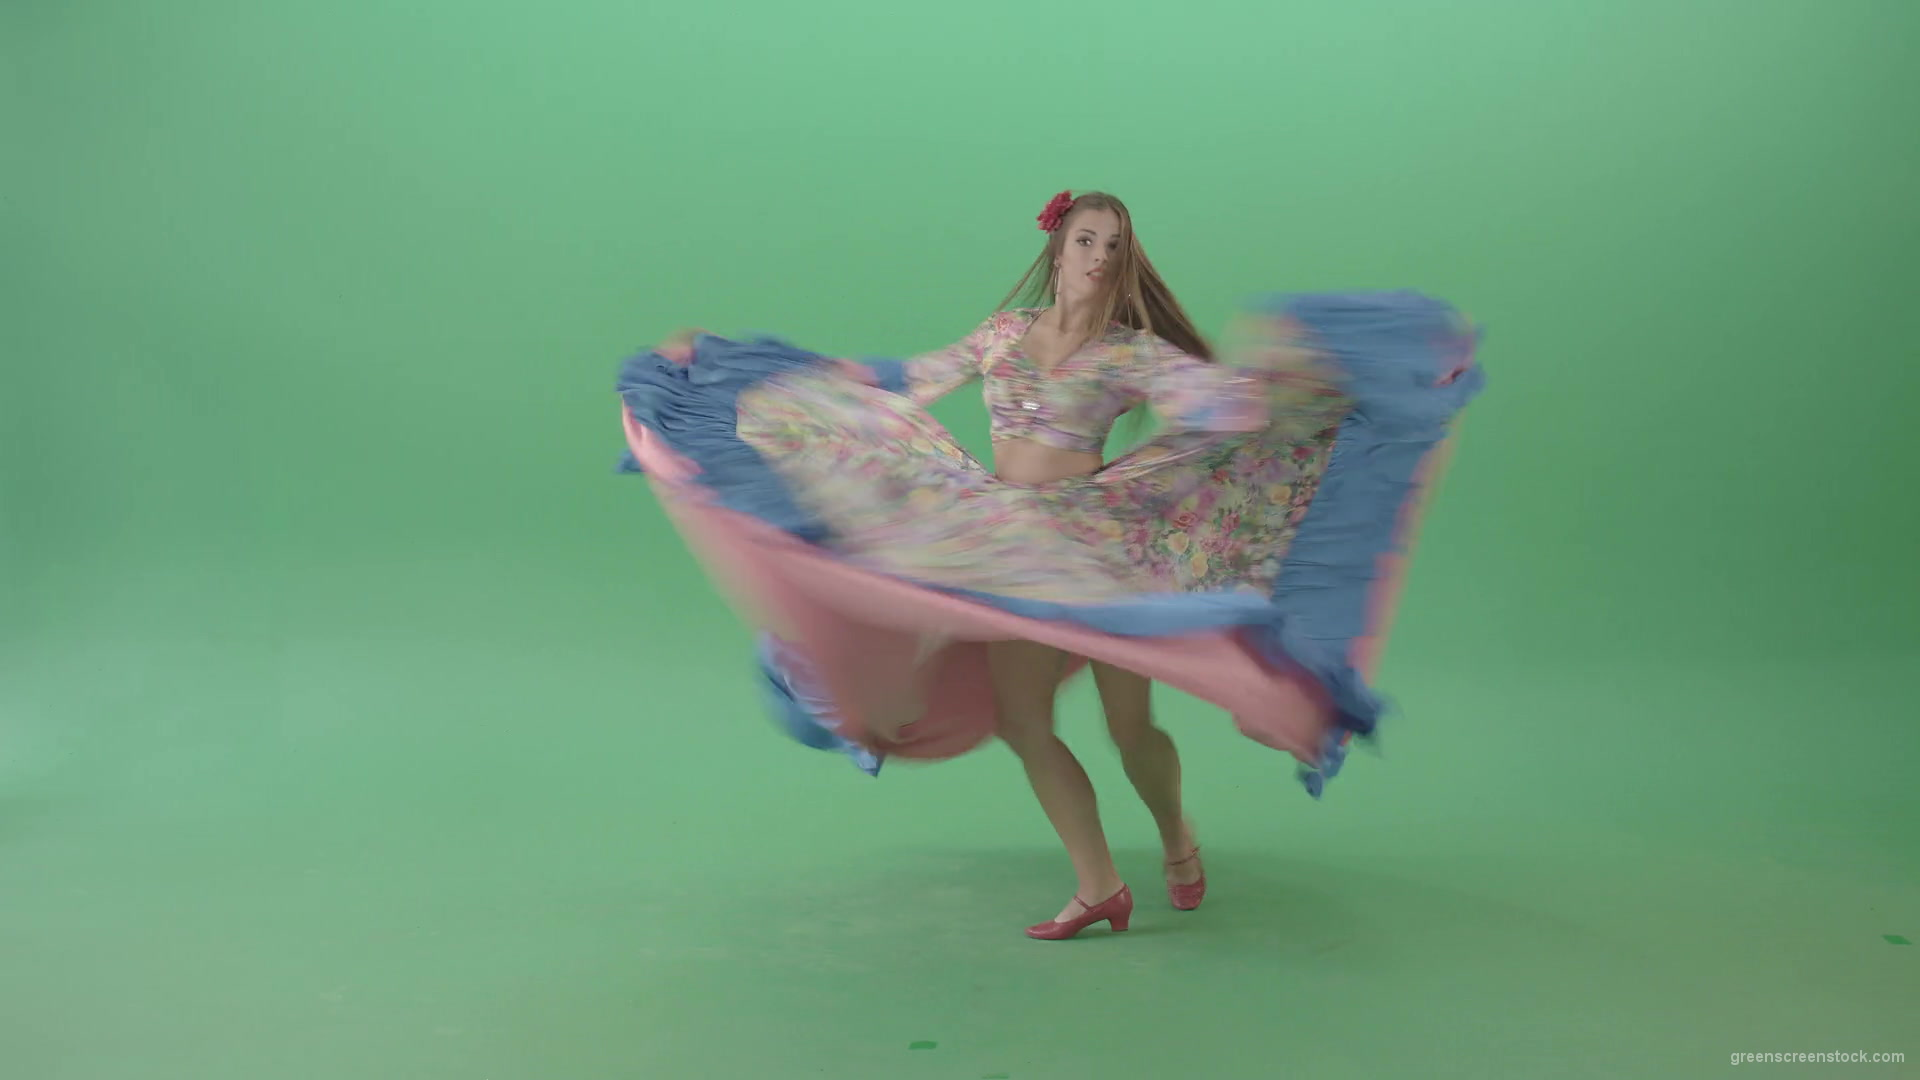 Roma-gipsy-woman-dancing-in-colorful-costume-isolated-on-Green-Screen-4K-Video-Footage-1920_006 Green Screen Stock